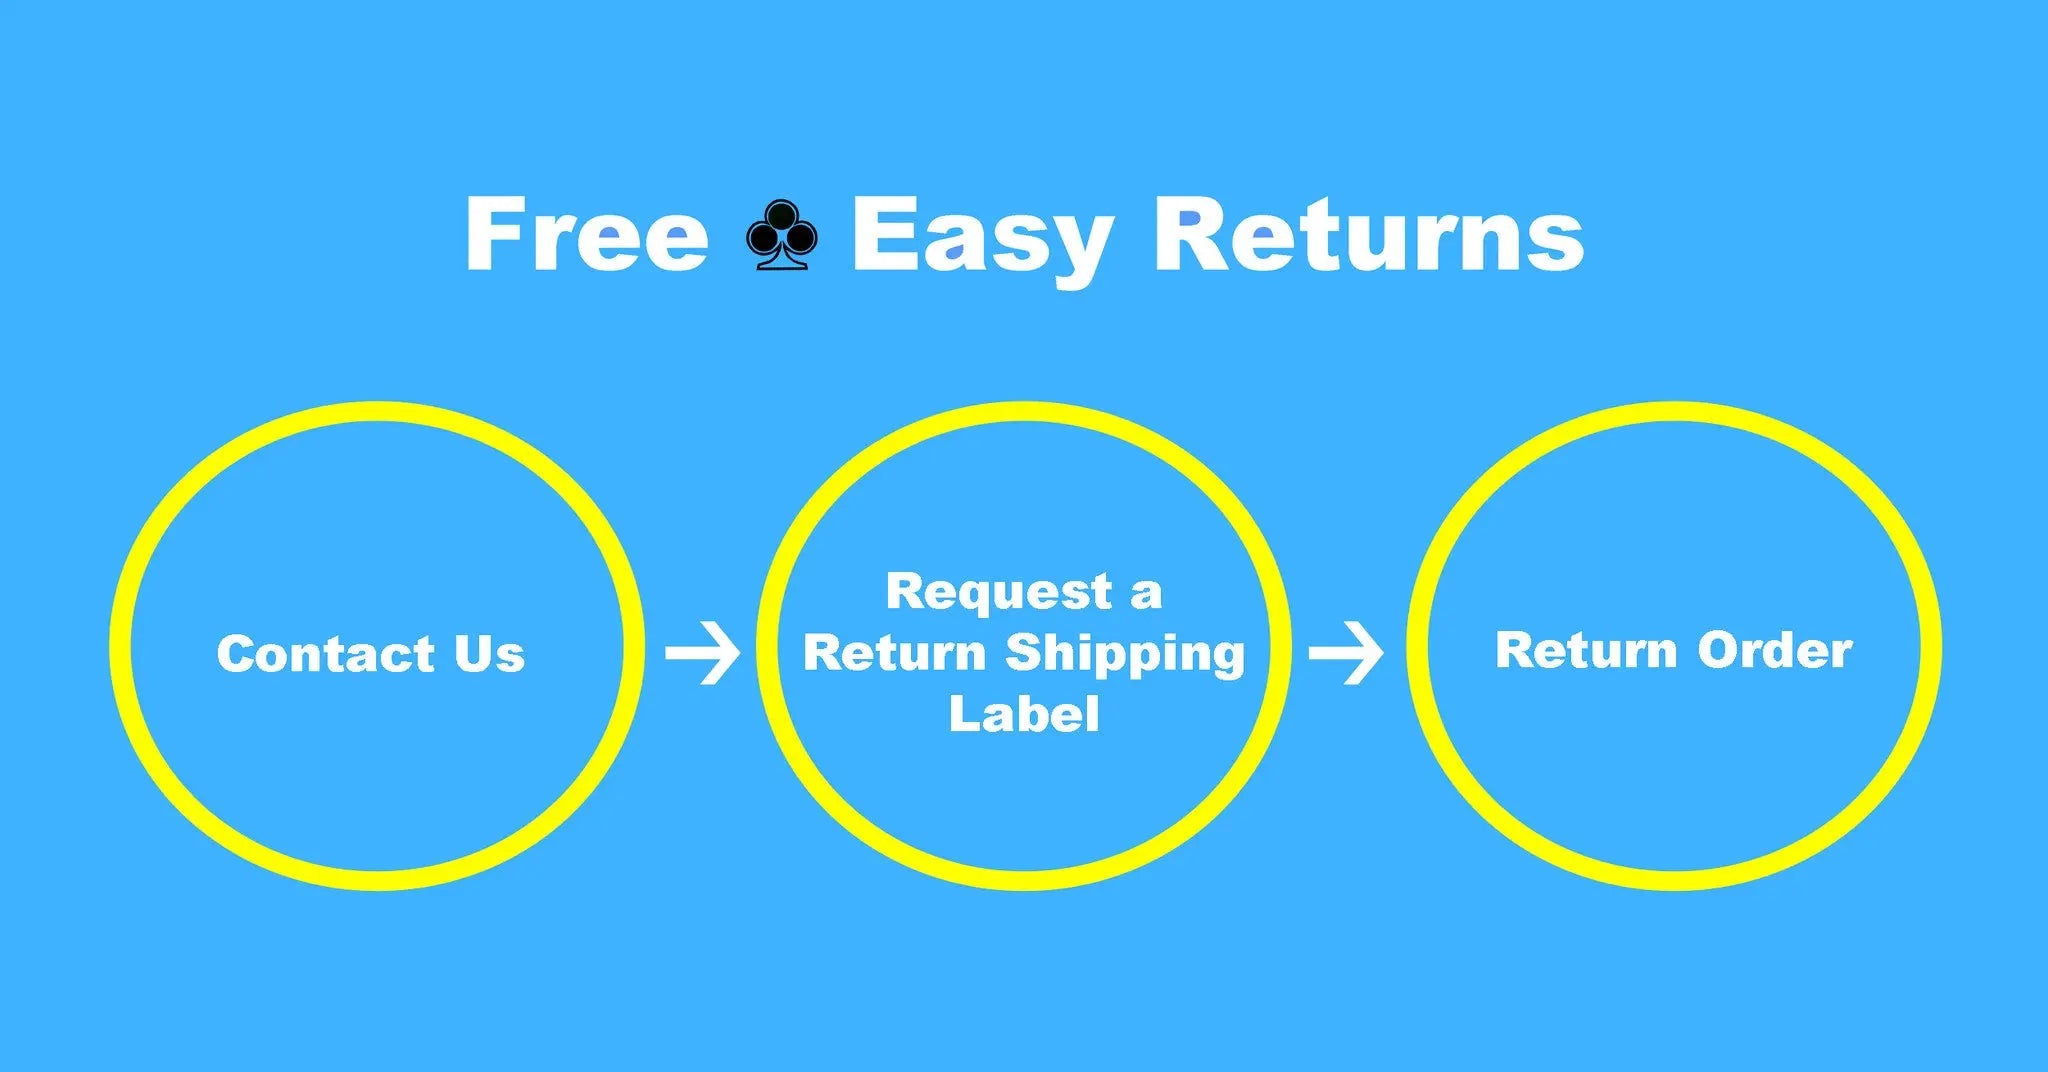 How To Get Free & Easy Returns